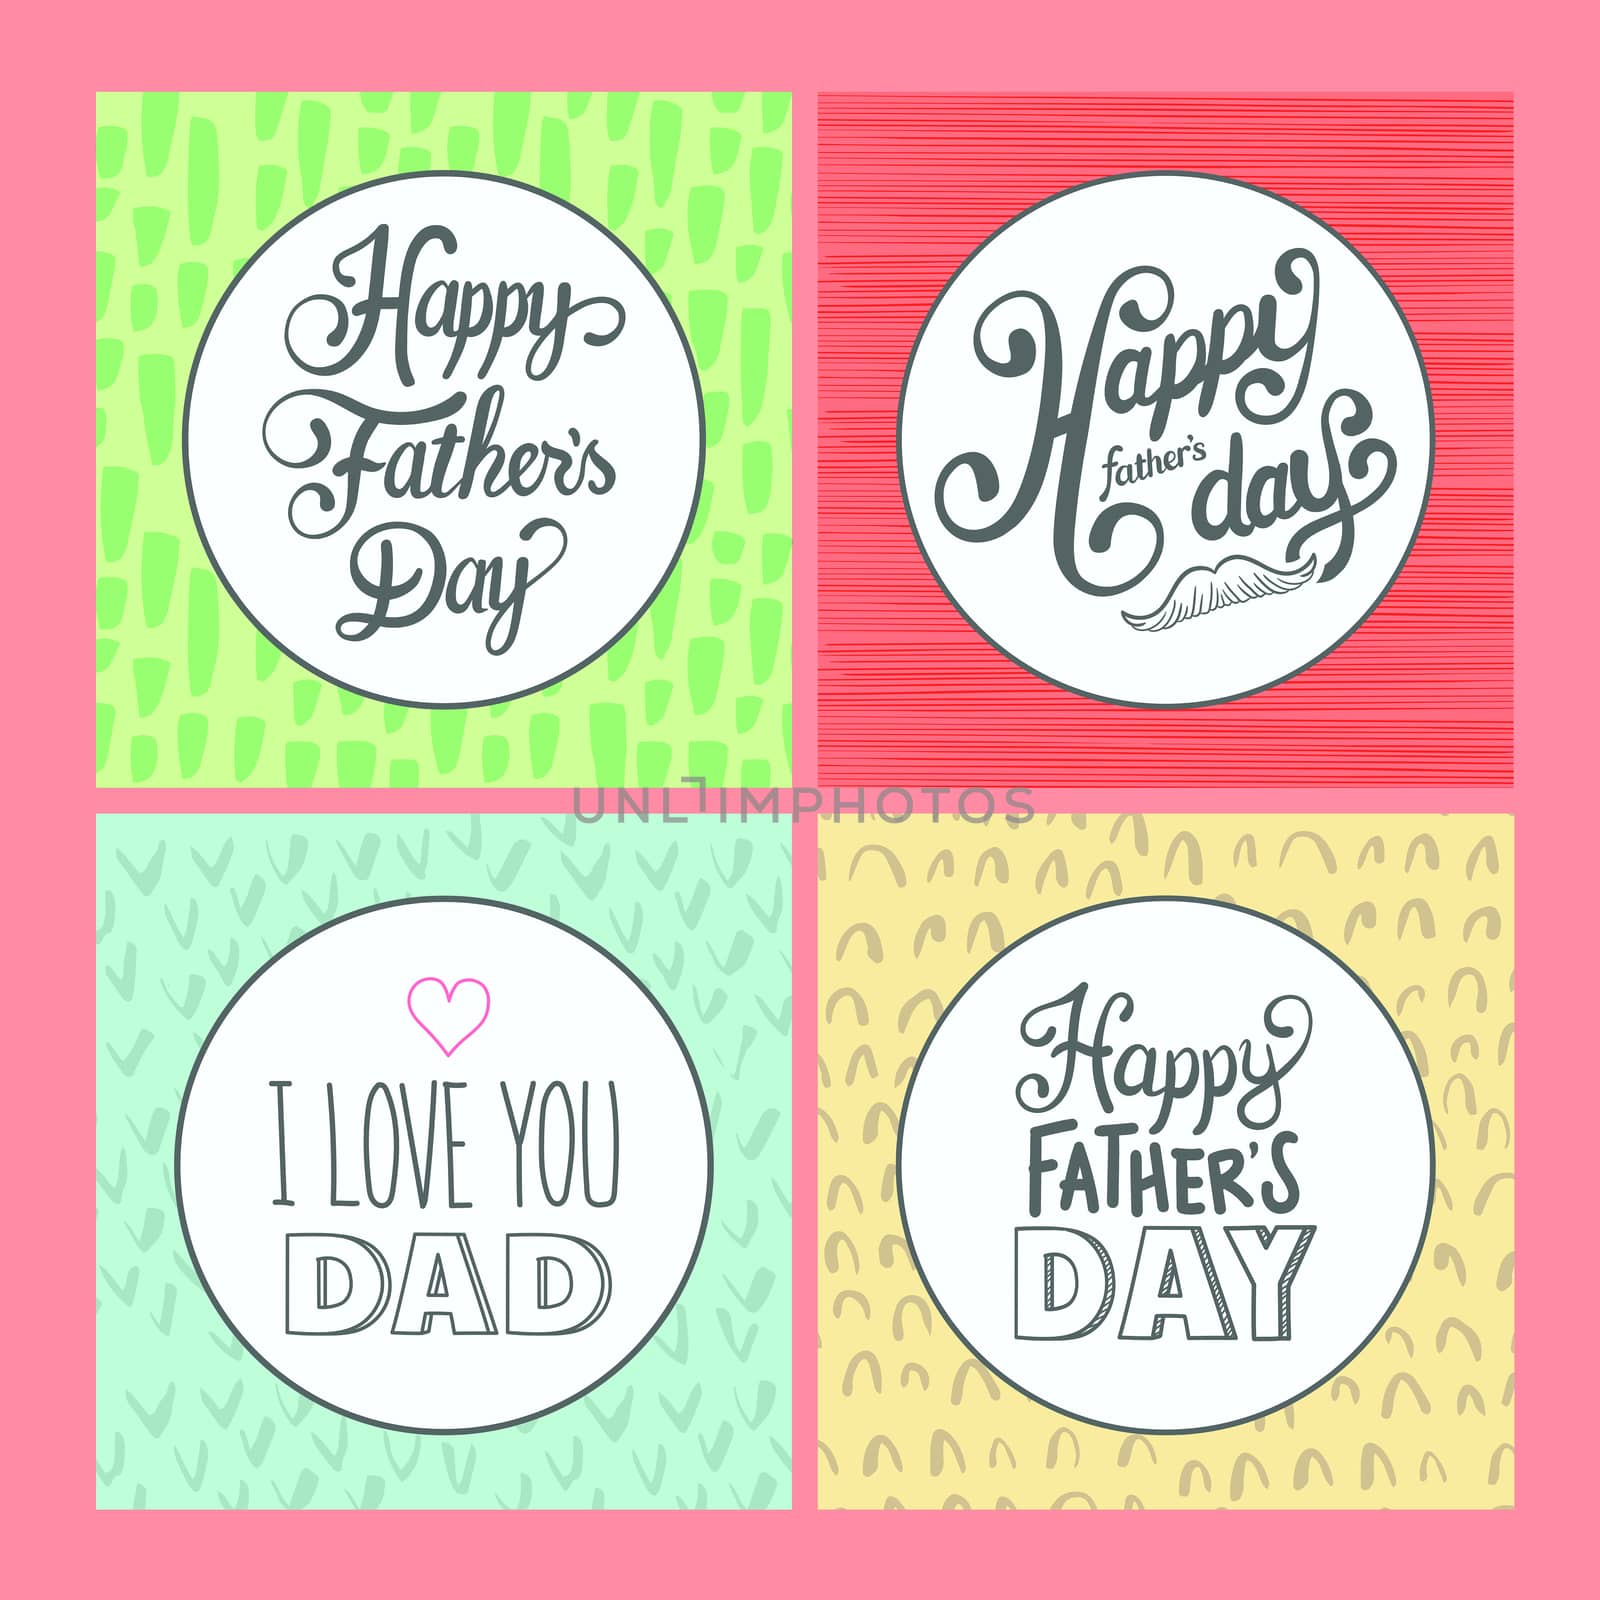 Greeting card with fathers day message by Wavebreakmedia